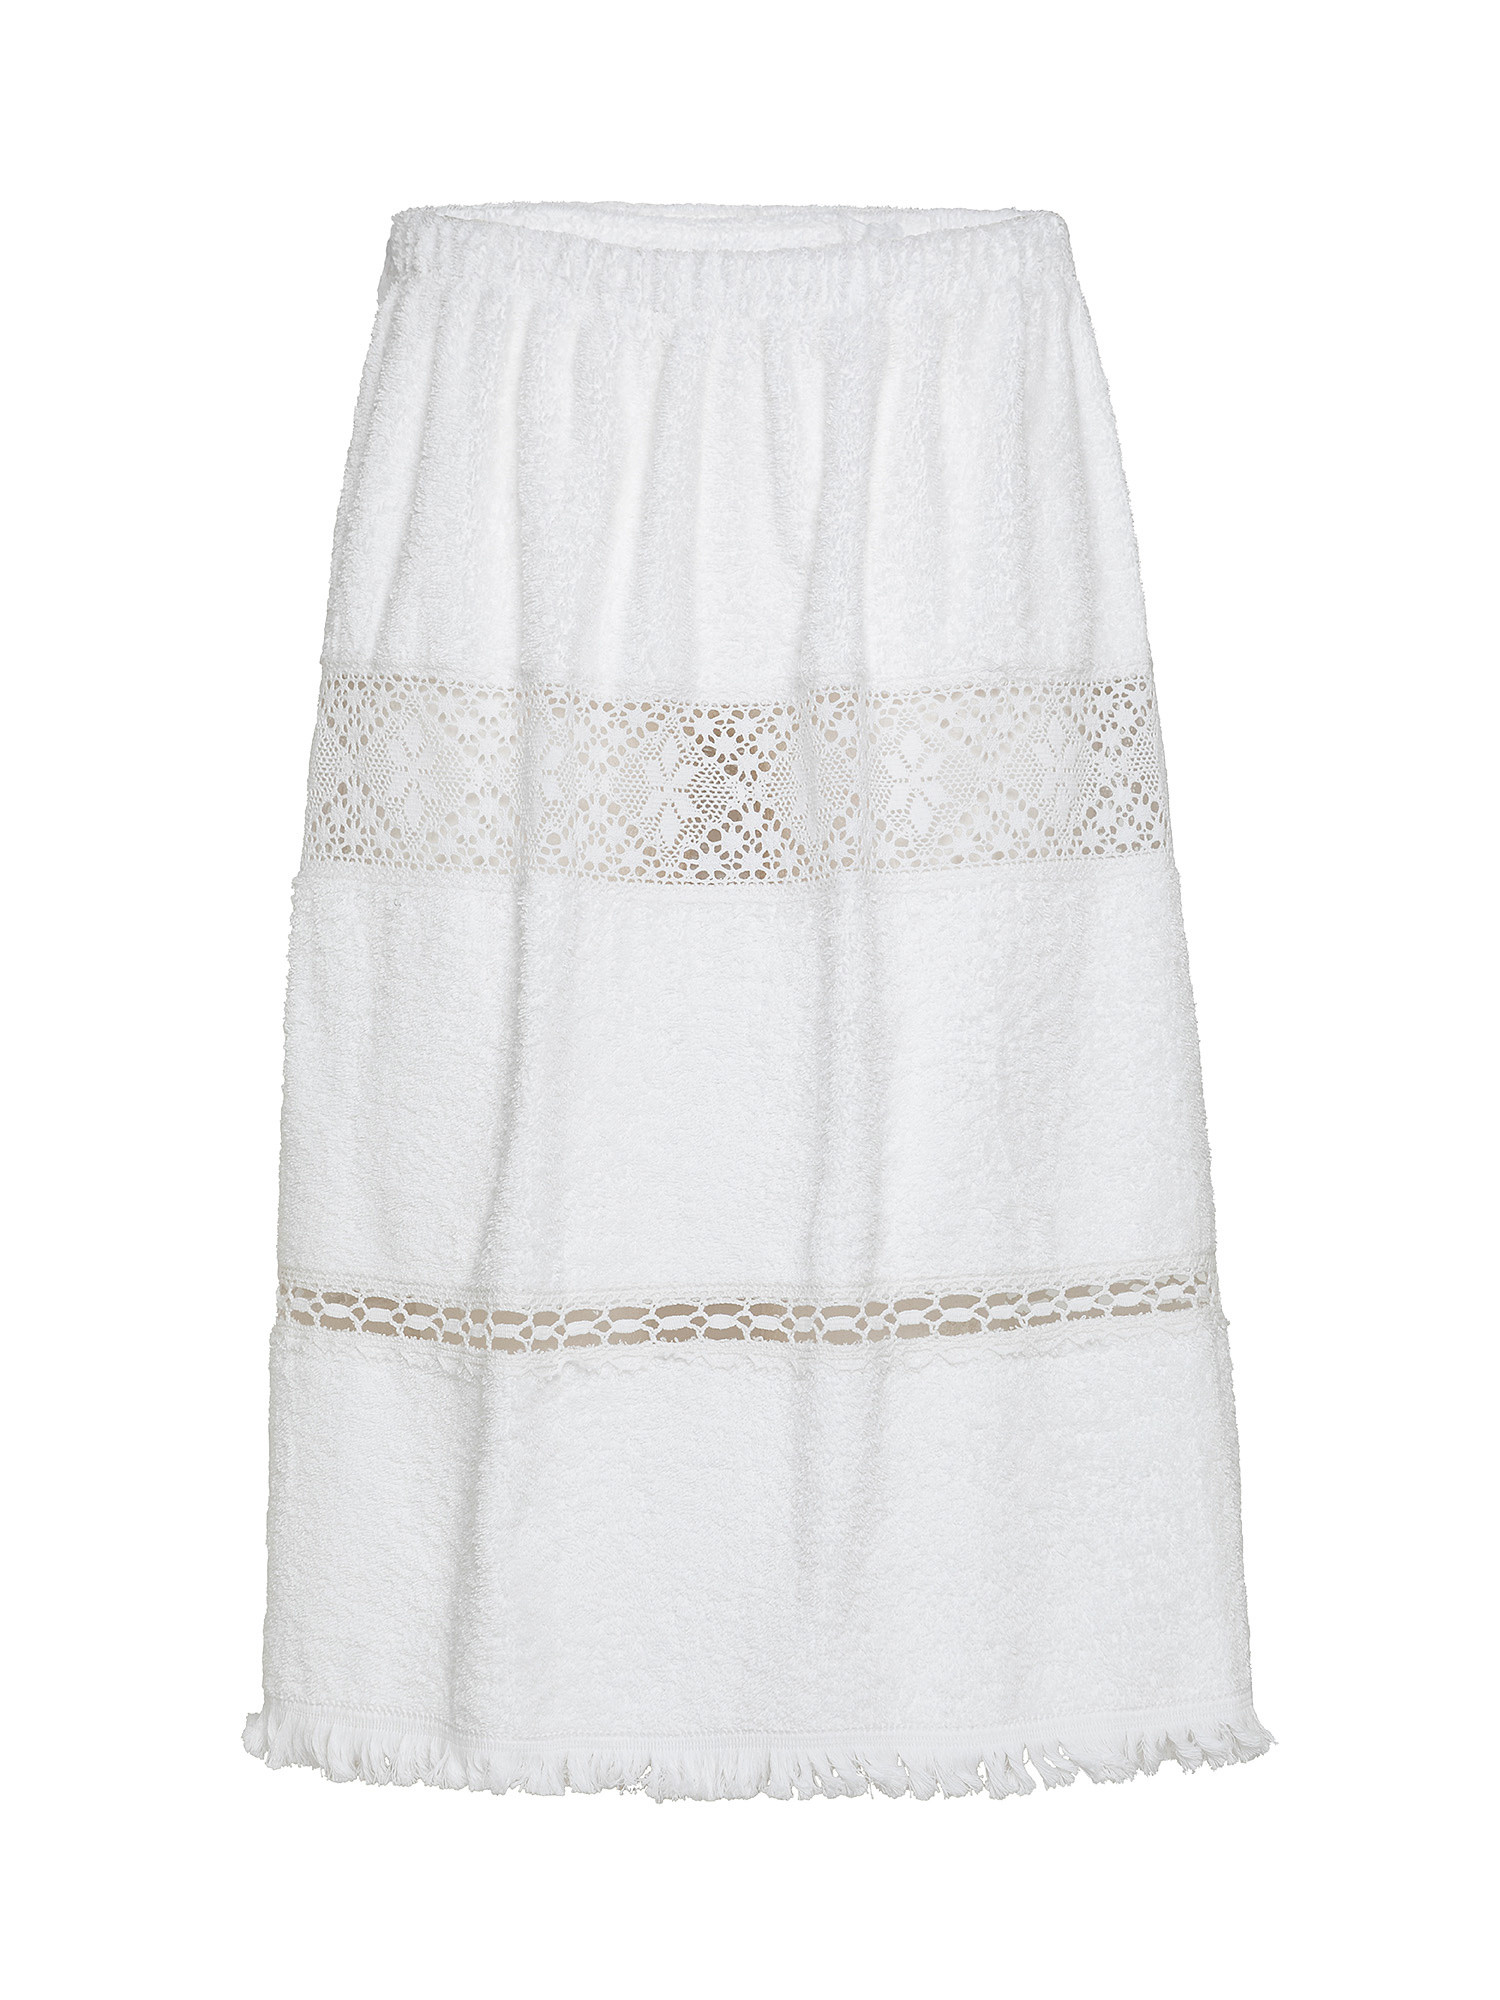 Cotton shower pareo with lace appliqués, White, large image number 0